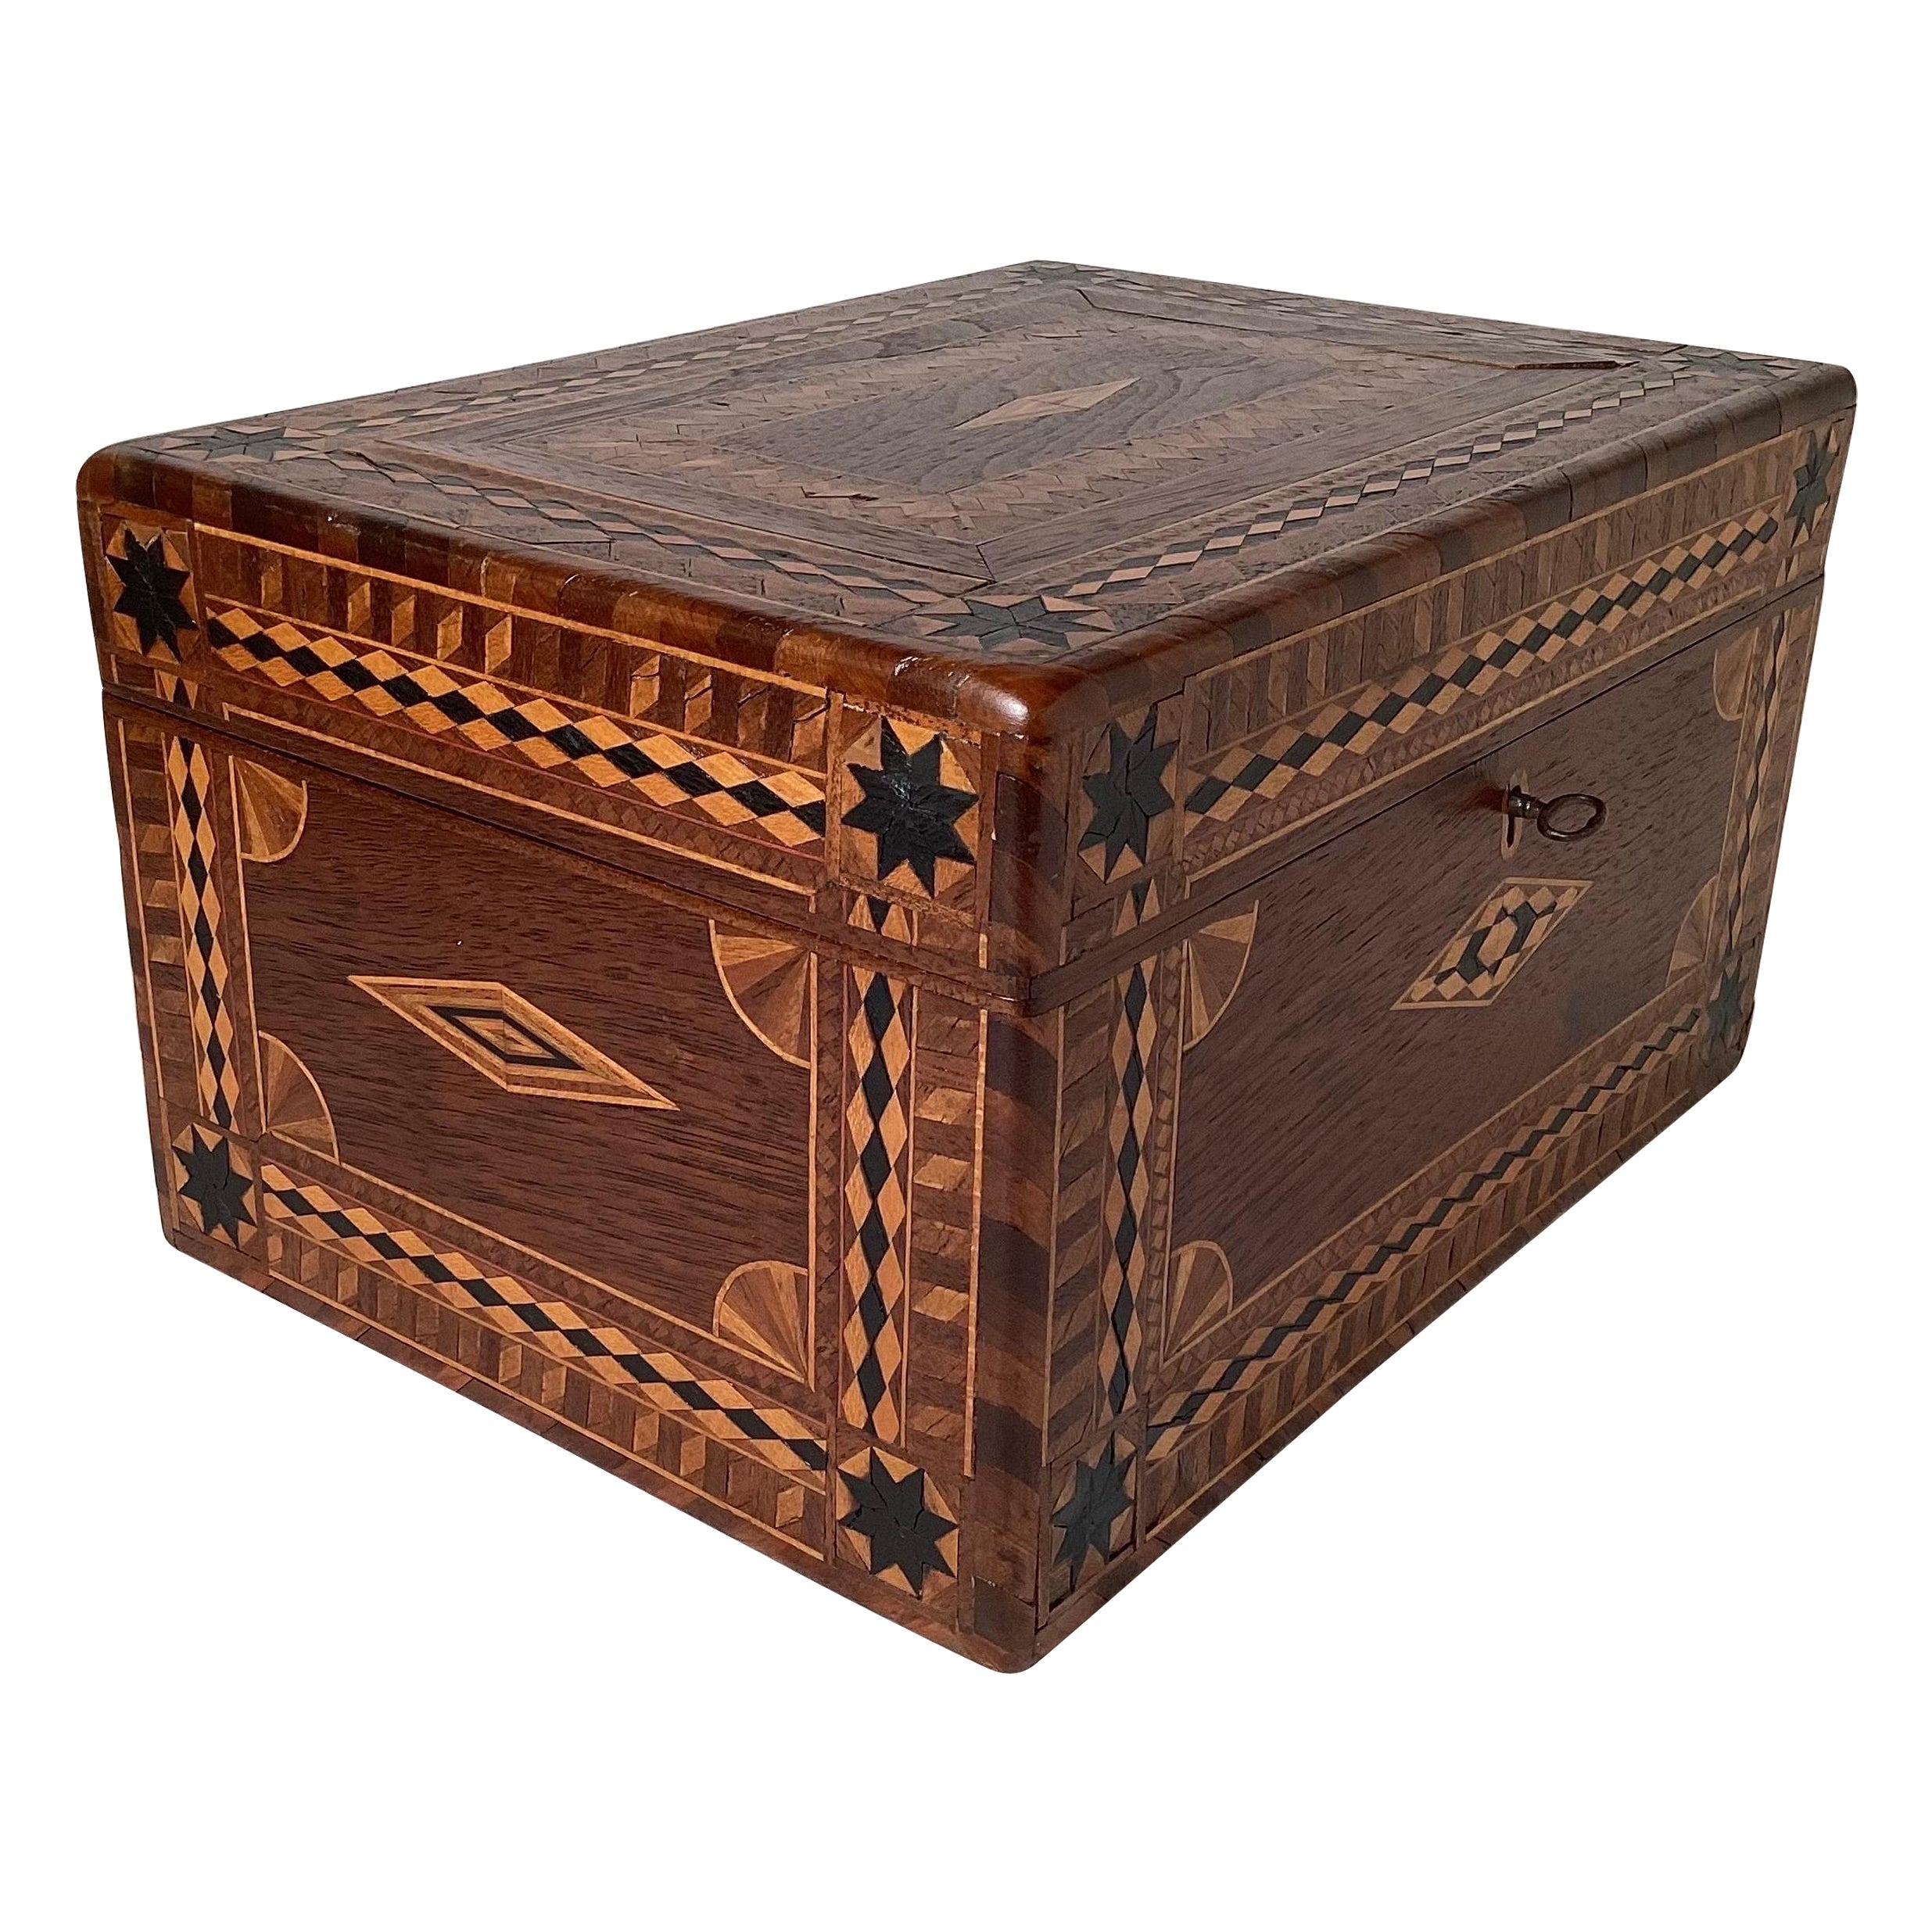 Exceptional 19th Century Inlaid Jewelry Box